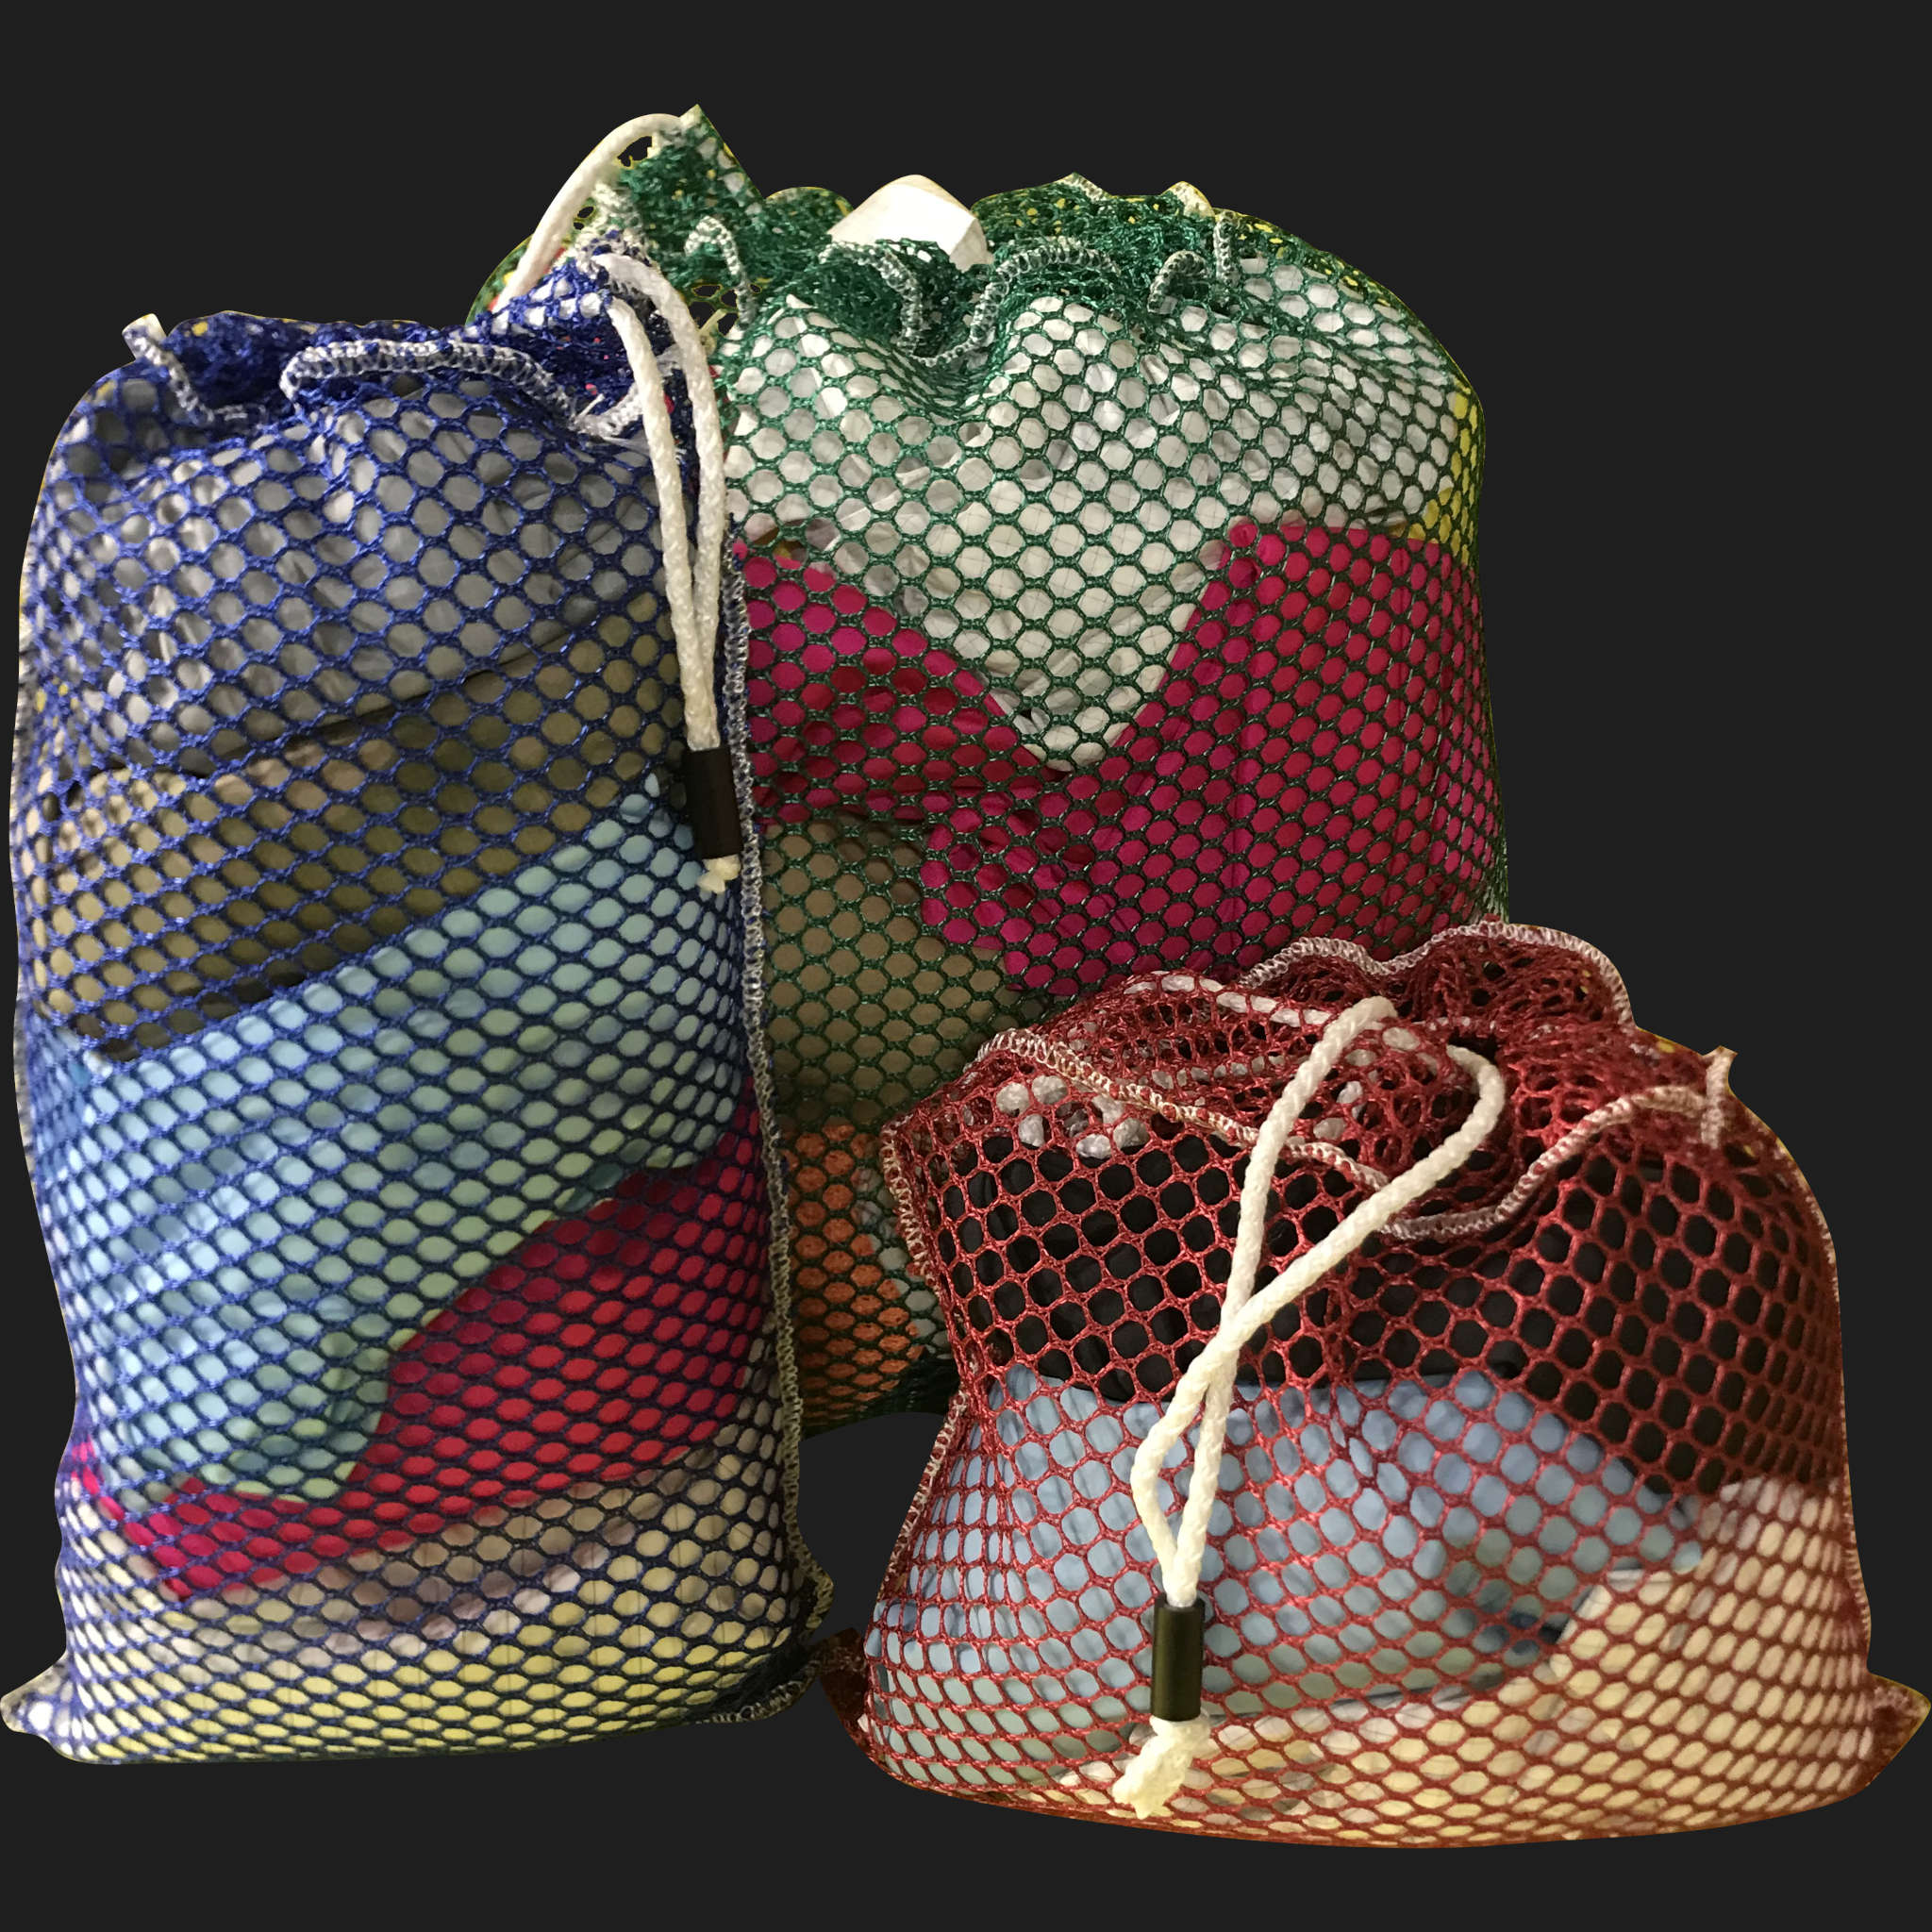 22" x 30" Customized Mesh-Net-Laundry Bags Heavy Duty with Cord and barrellock closure